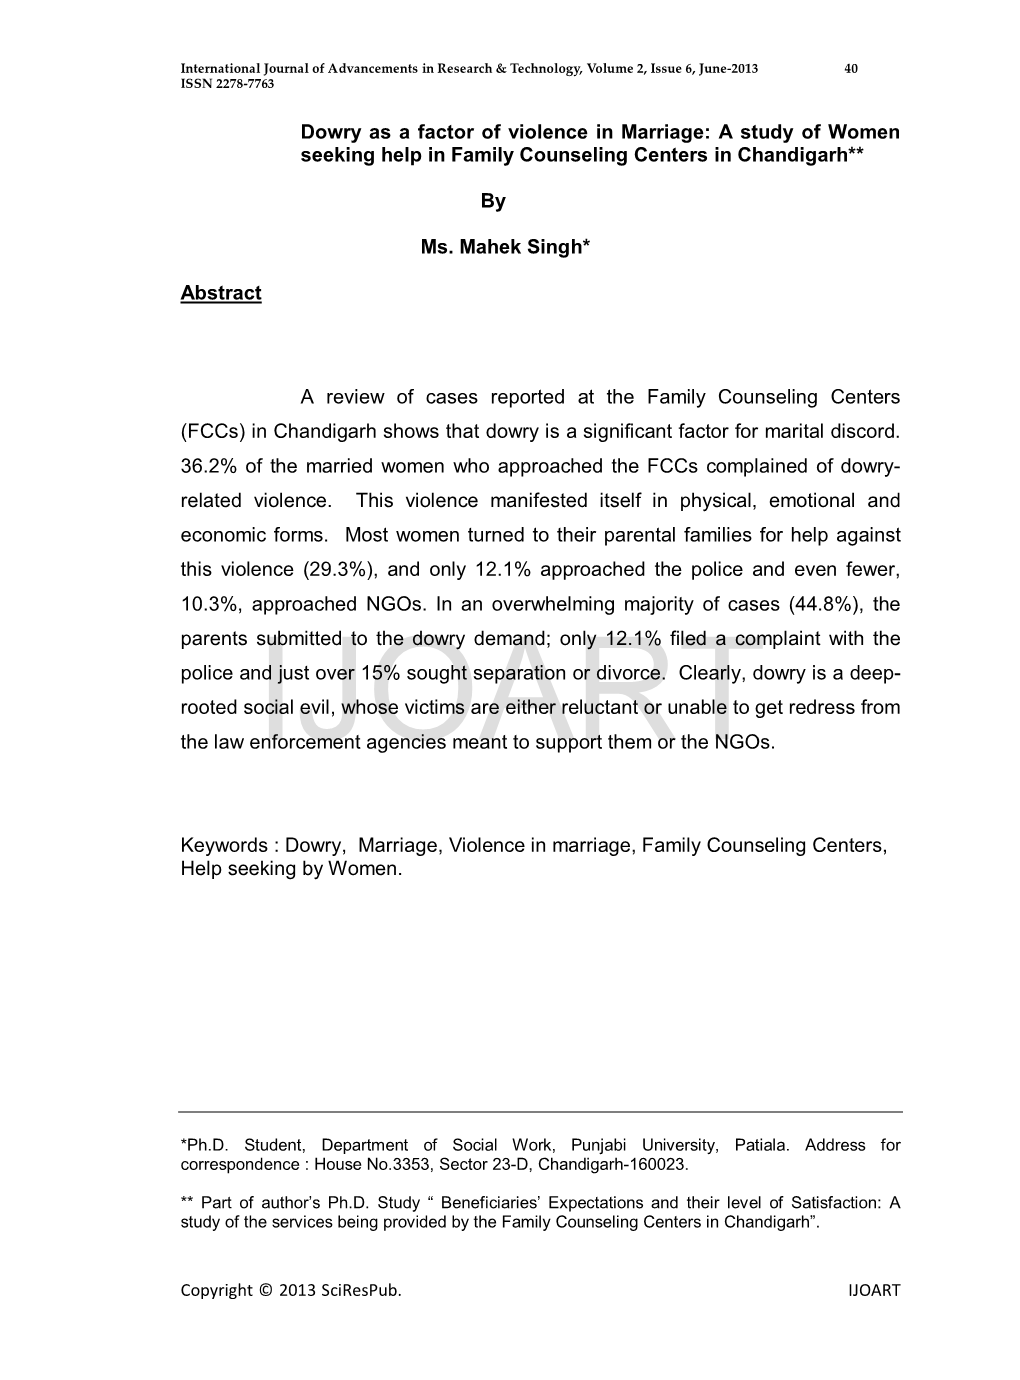 Dowry As a Factor of Violence in Marriage: a Study of Women Seeking Help in Family Counseling Centers in Chandigarh**